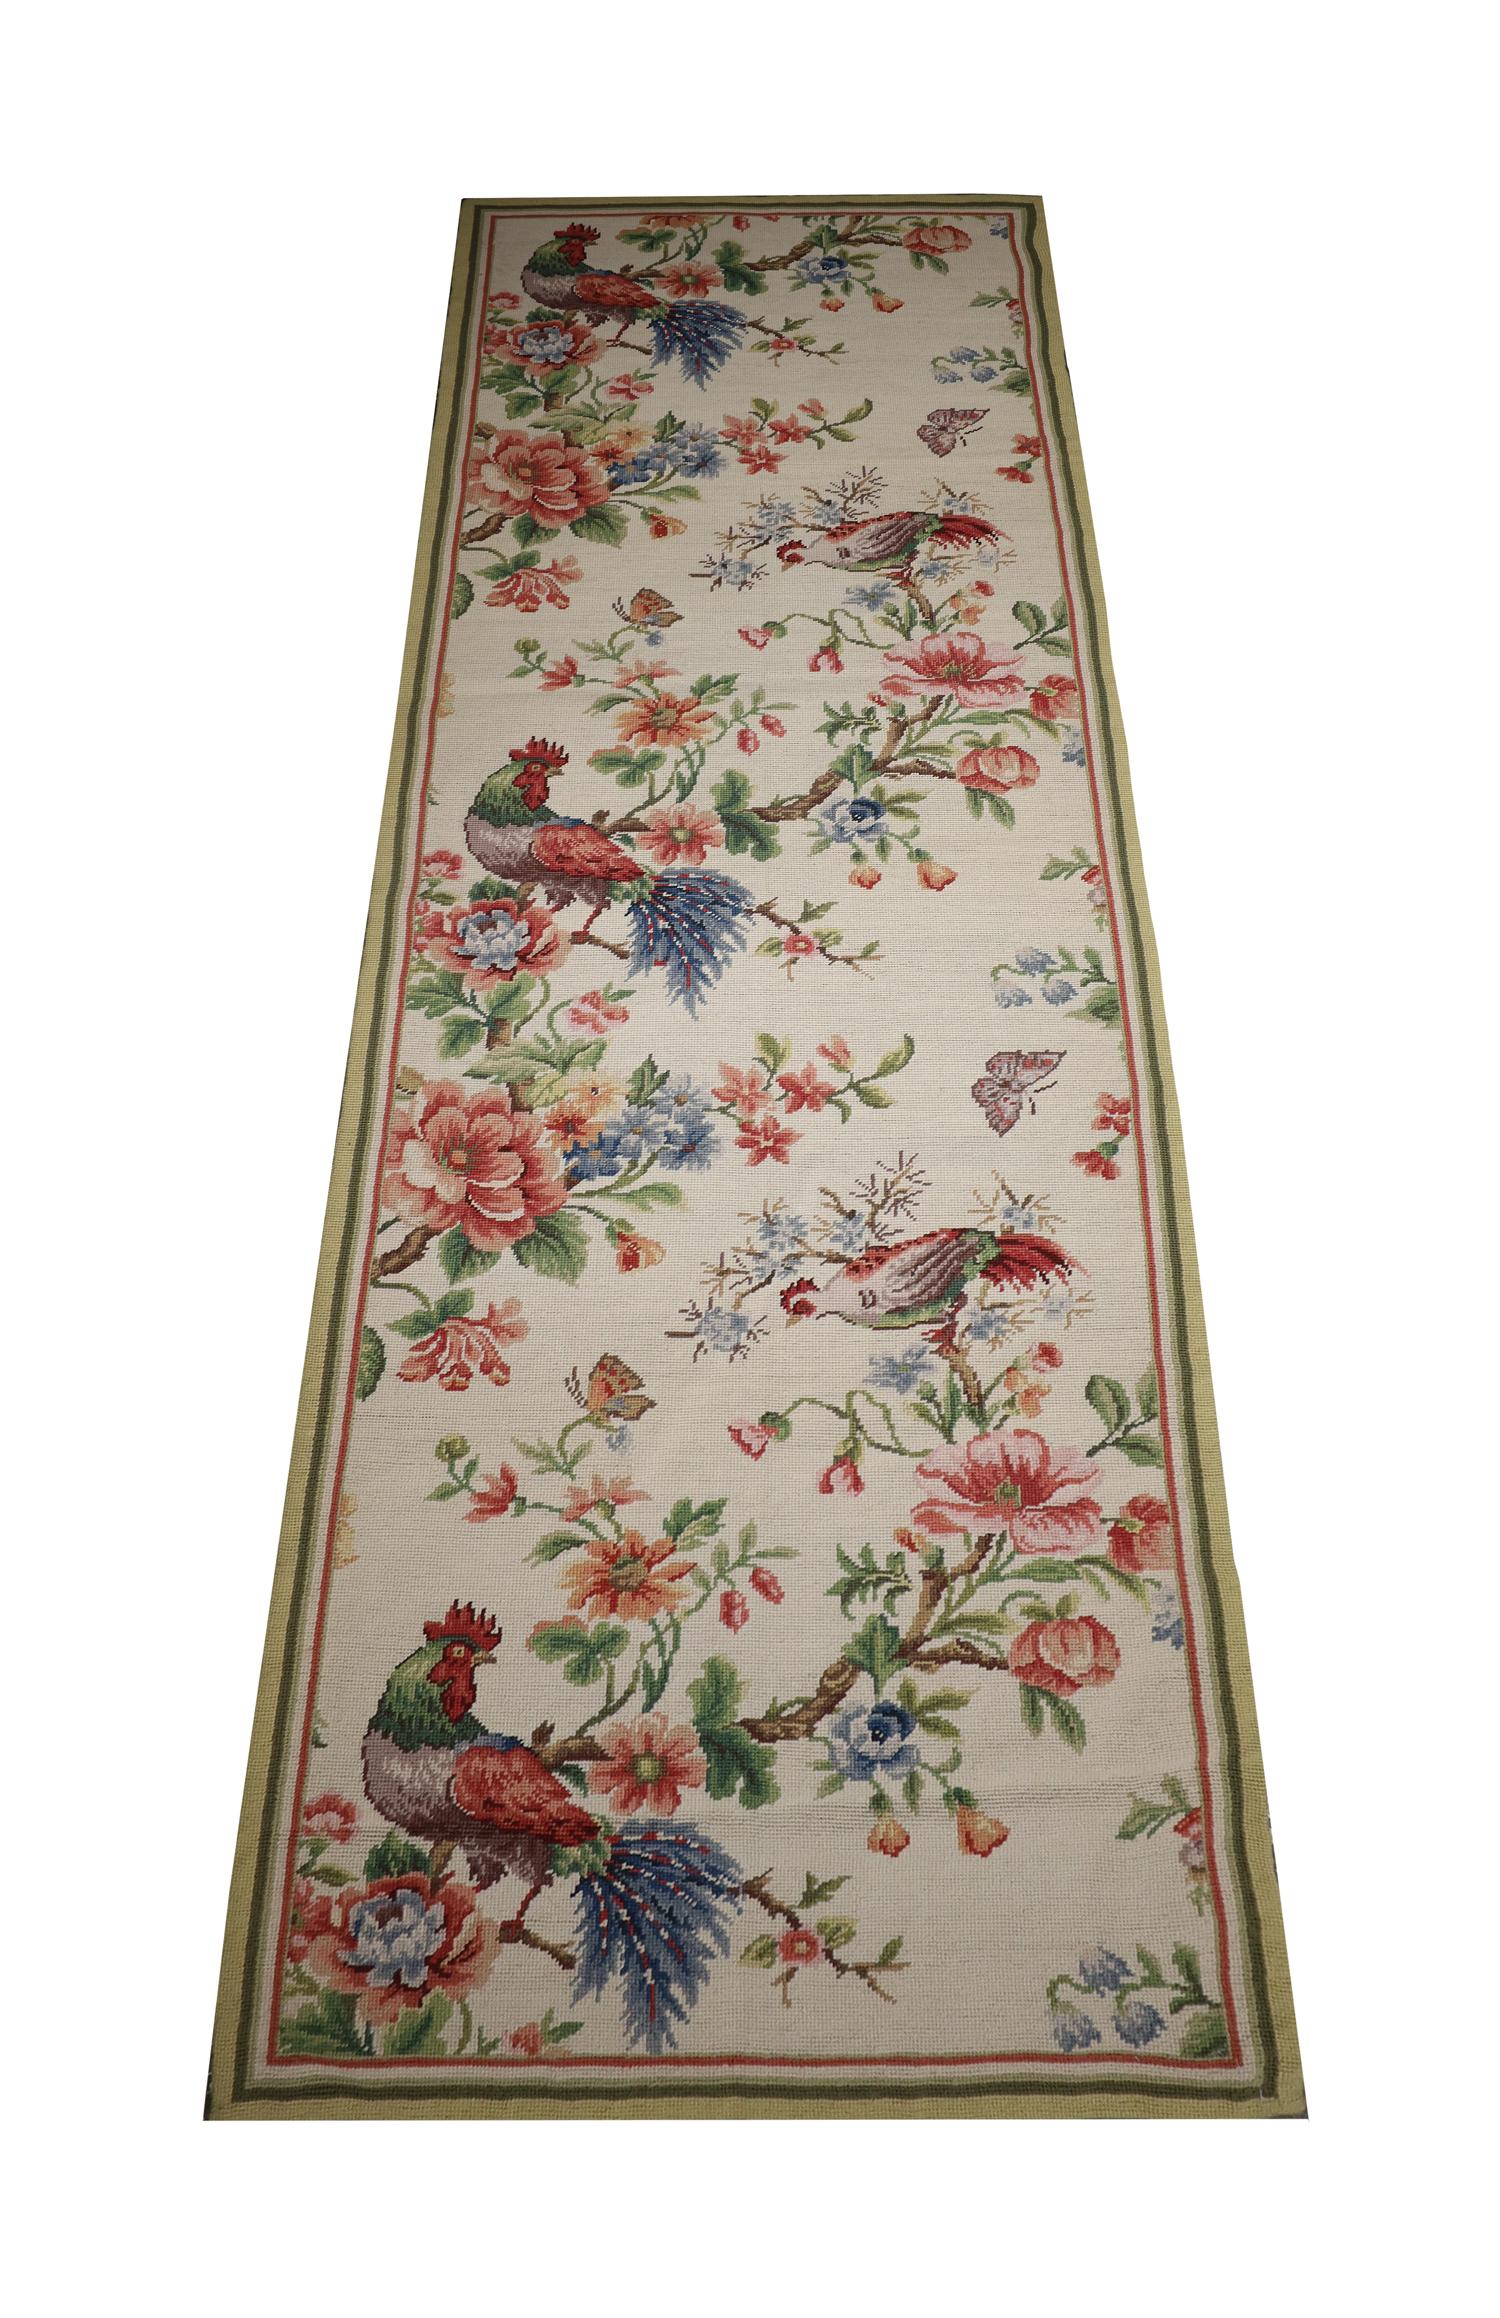 The design of this needlepoint rug features a simple cream background with accents of green, pink and blue that make up the flowers and animals. Beautifully woven with delicate details throughout, creating an elegant accent rug sure to uplift any